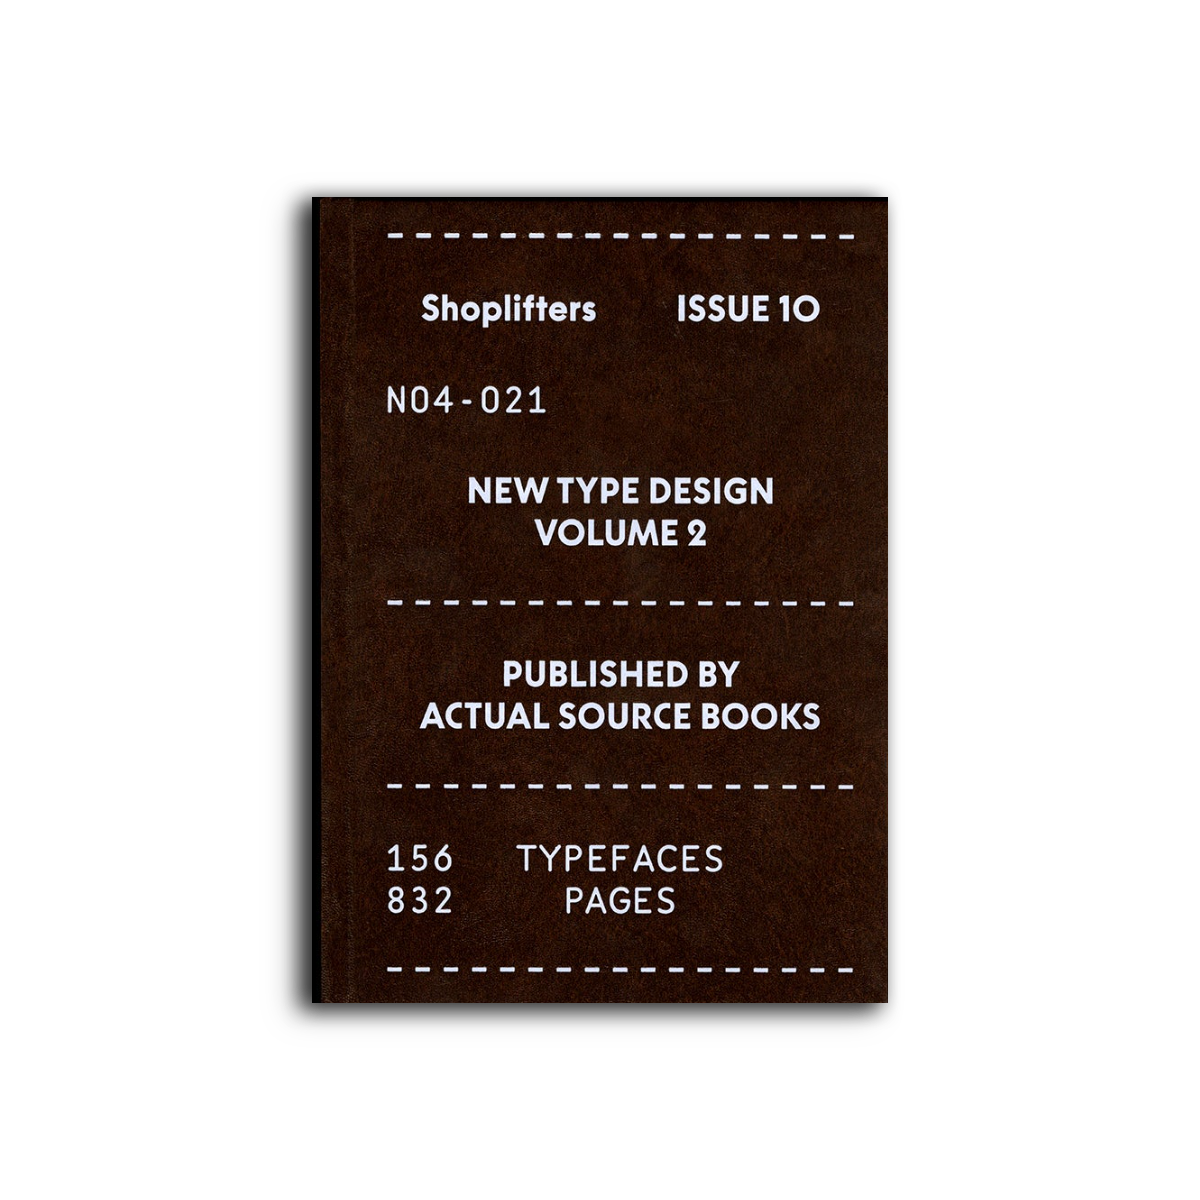 SHOPLIFTERS, ISSUE 10 – NEW TYPE DESIGN VOLUME 2